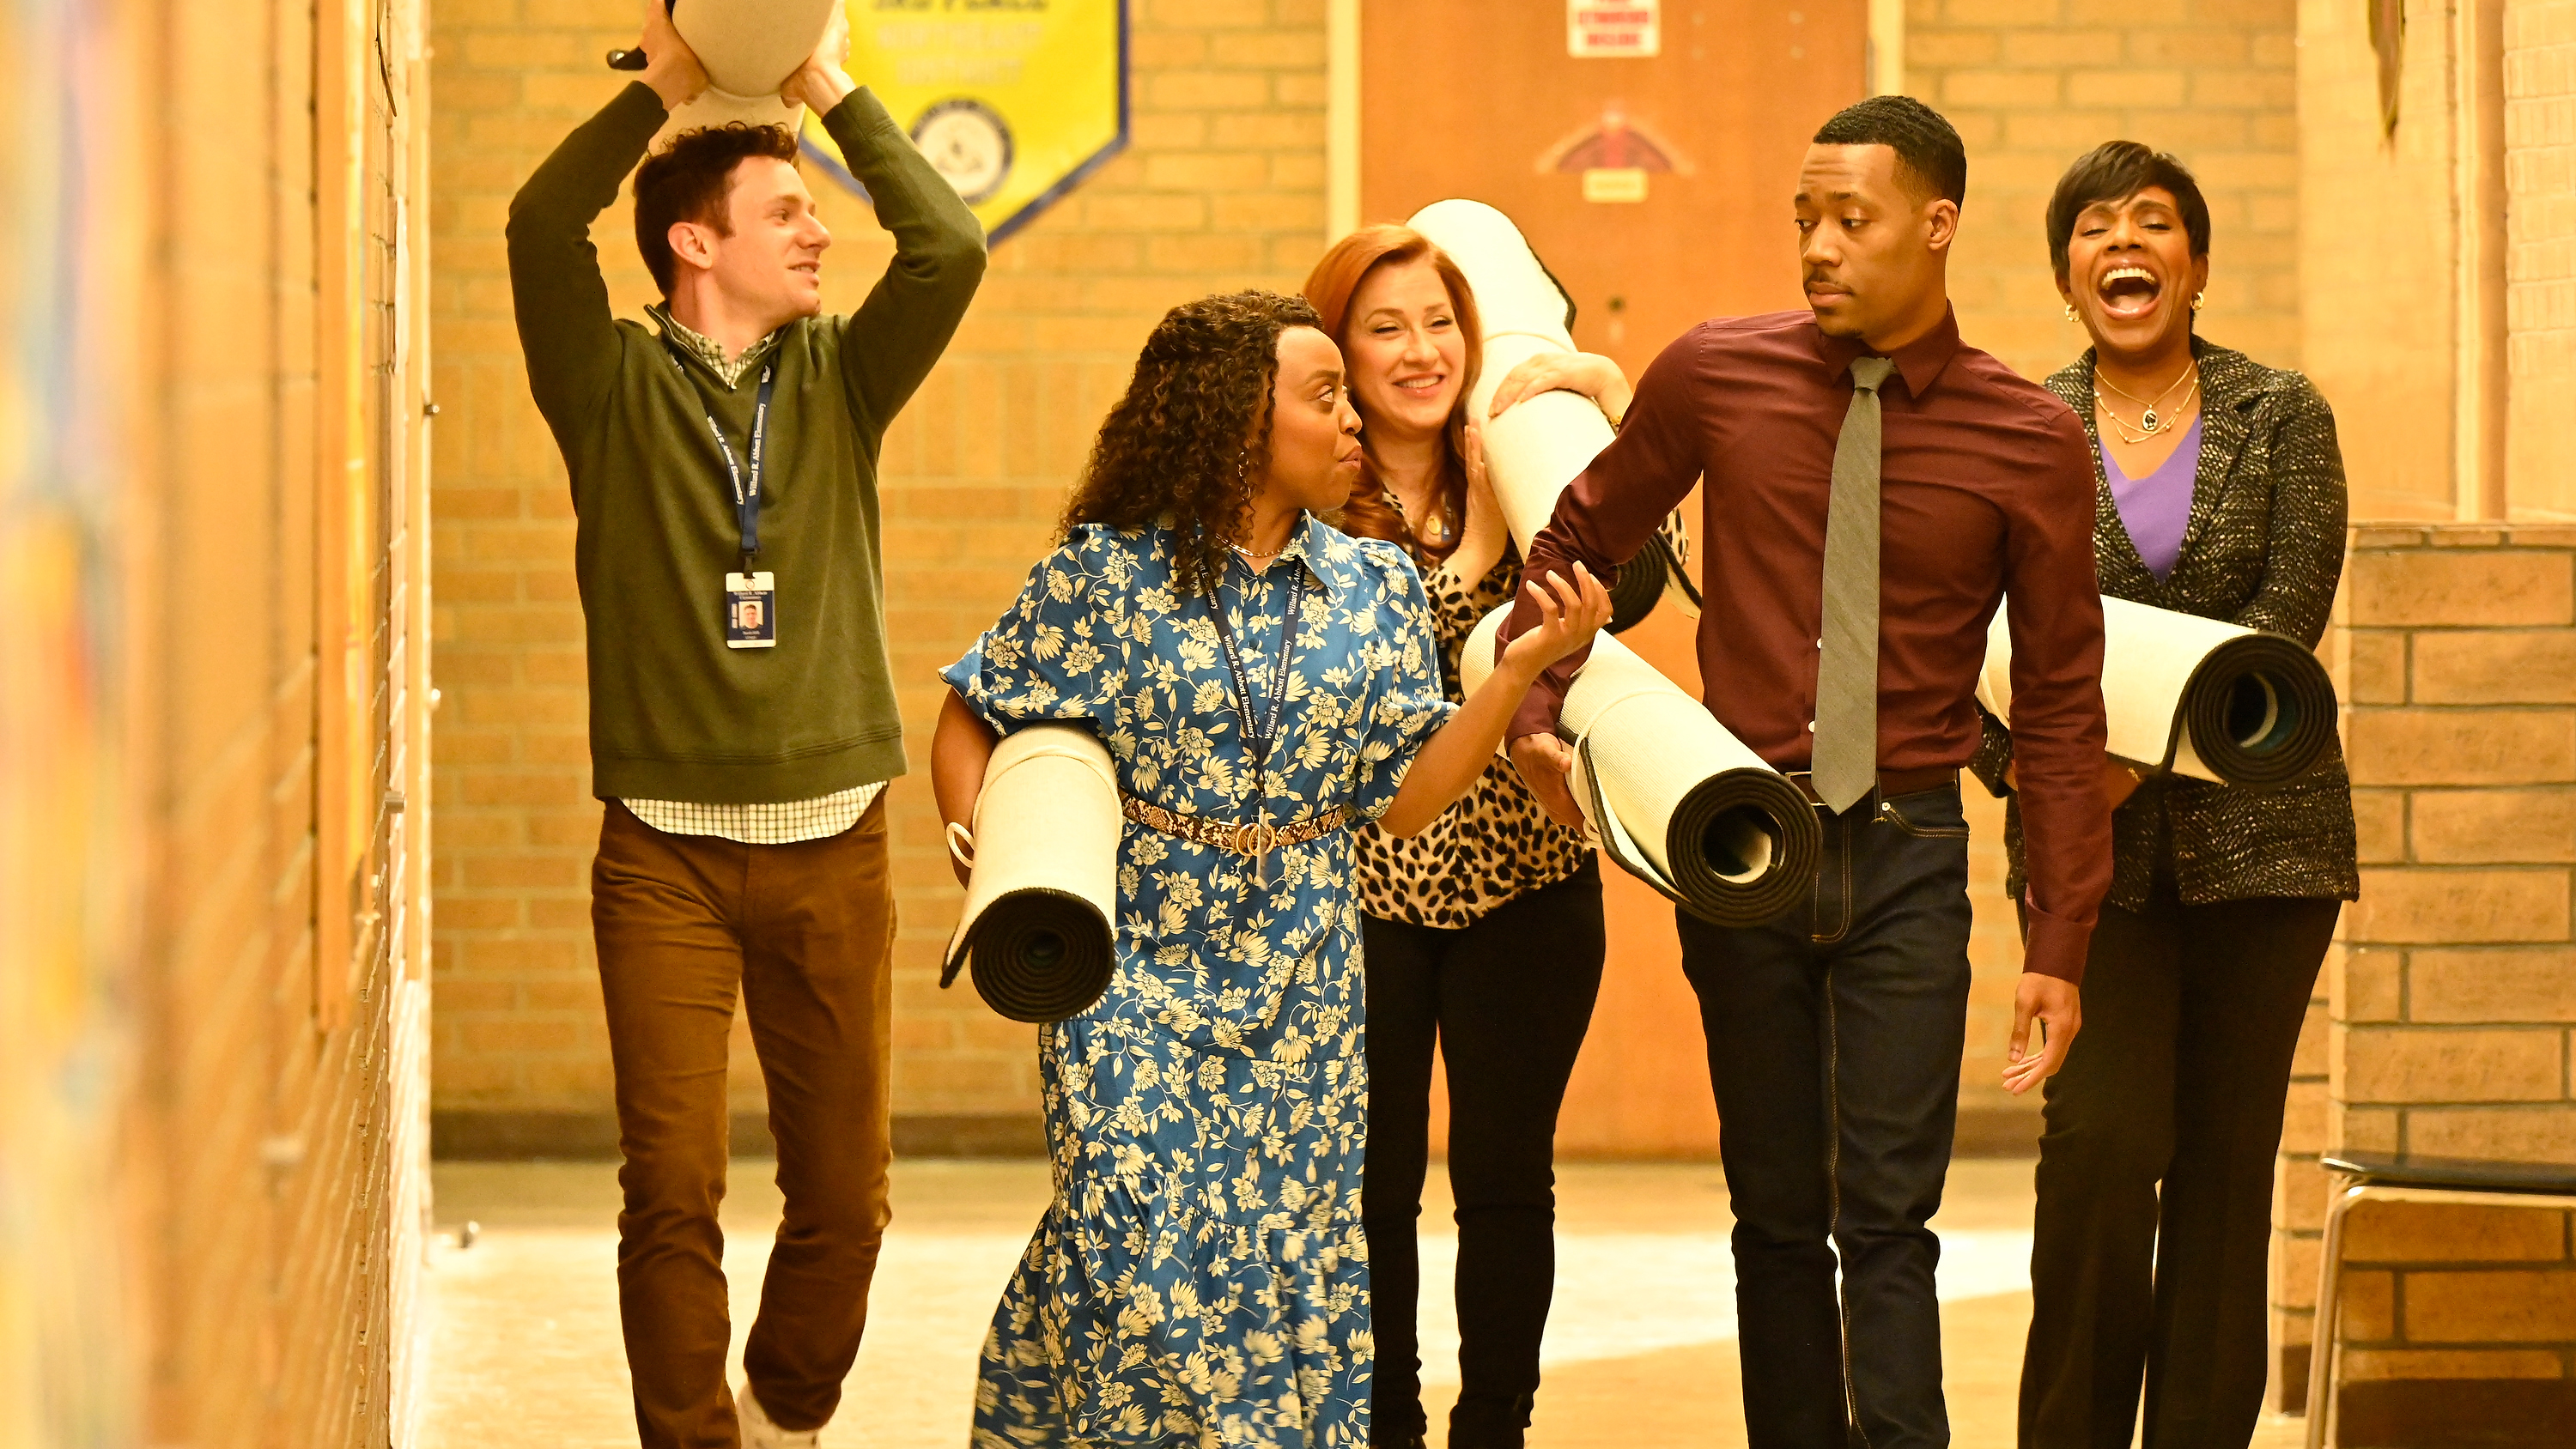 Chris Perfetti as Jacob Hill, Quinta Bronson as Janine Teggs, Lisa Ann Walter as Melissa Chimenti, Tyler James Williams as Gregory Eddy, Sheryl Lee Ralph as Barbara Howard carrying rolled rugs at Abbott Elementary School